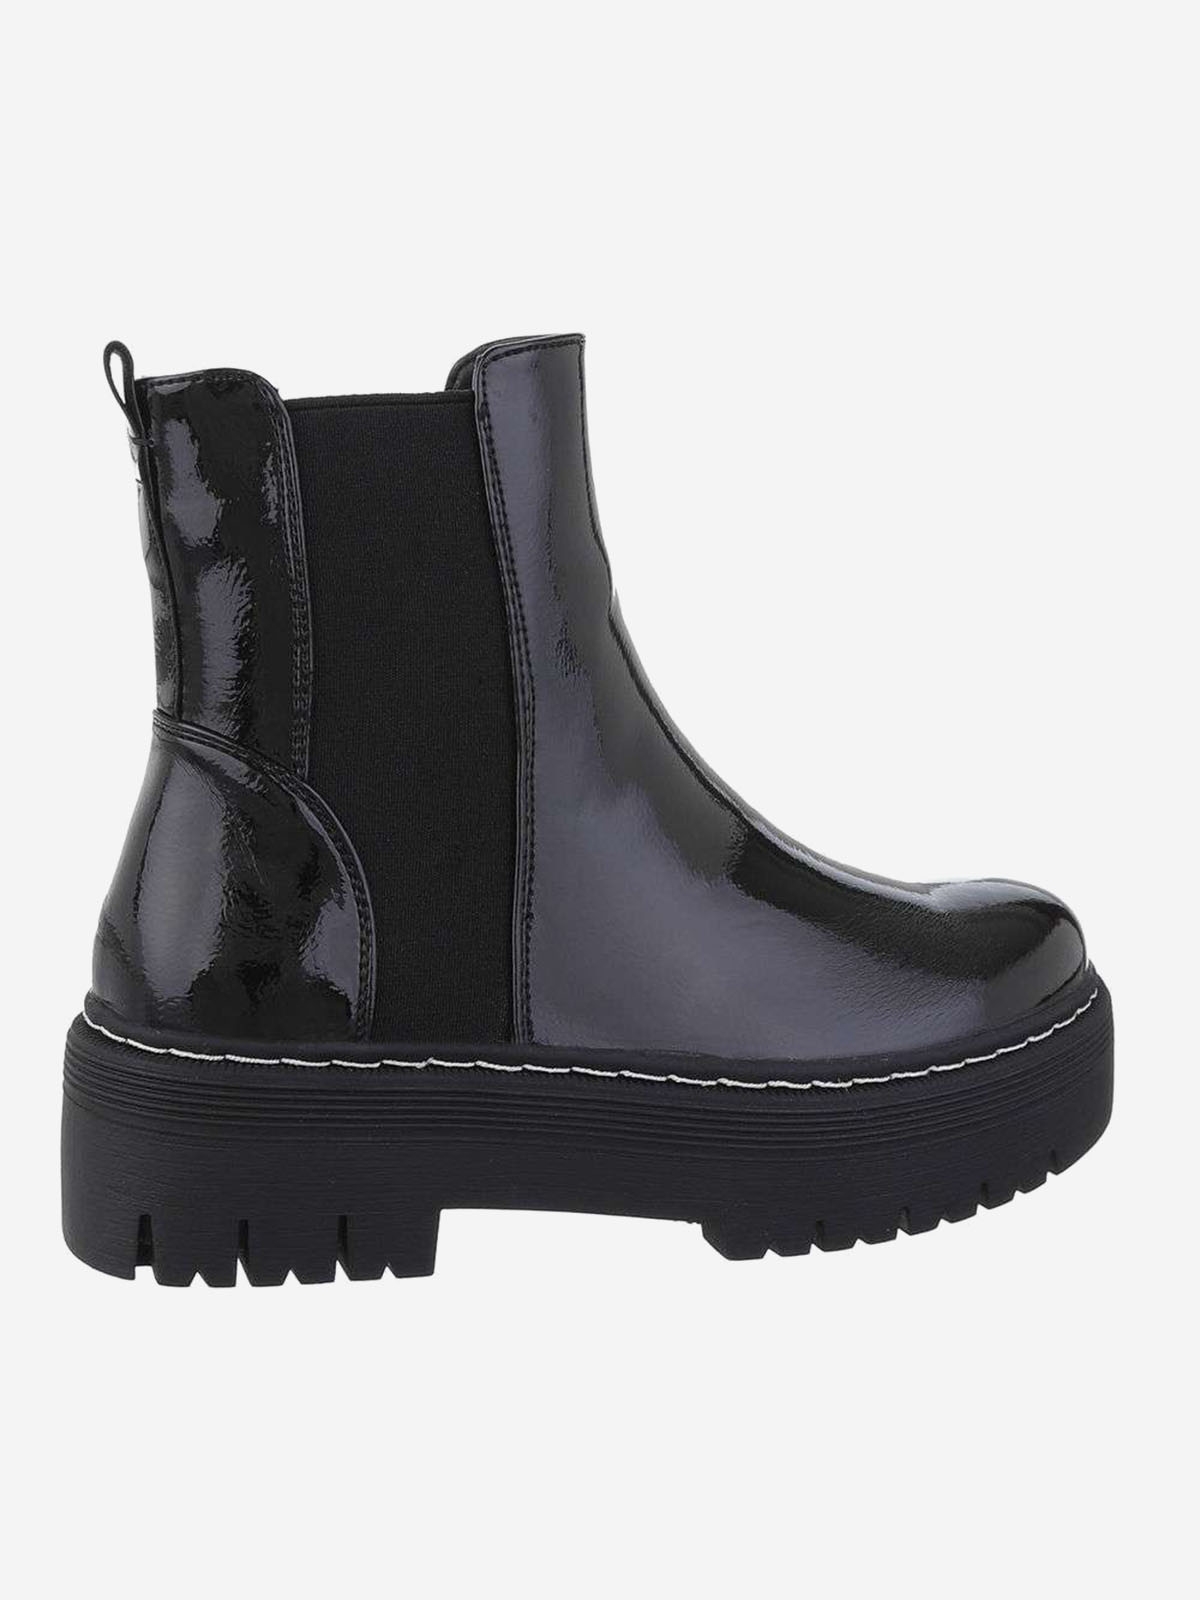 Chelsea style laquered women's ankle boots in black